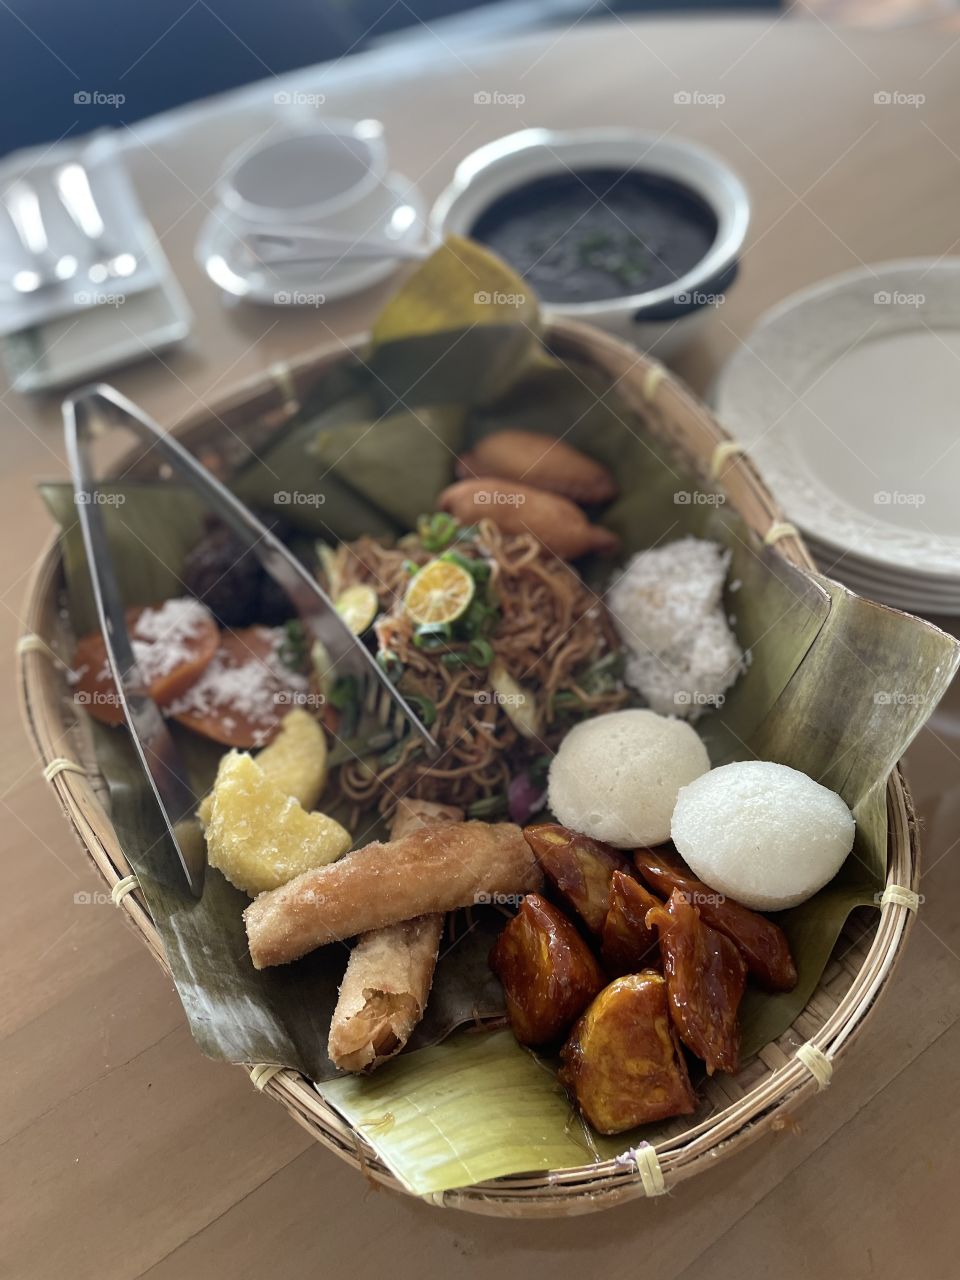 Filipino native foods in a winnowing basket (bowl made of bamboo)